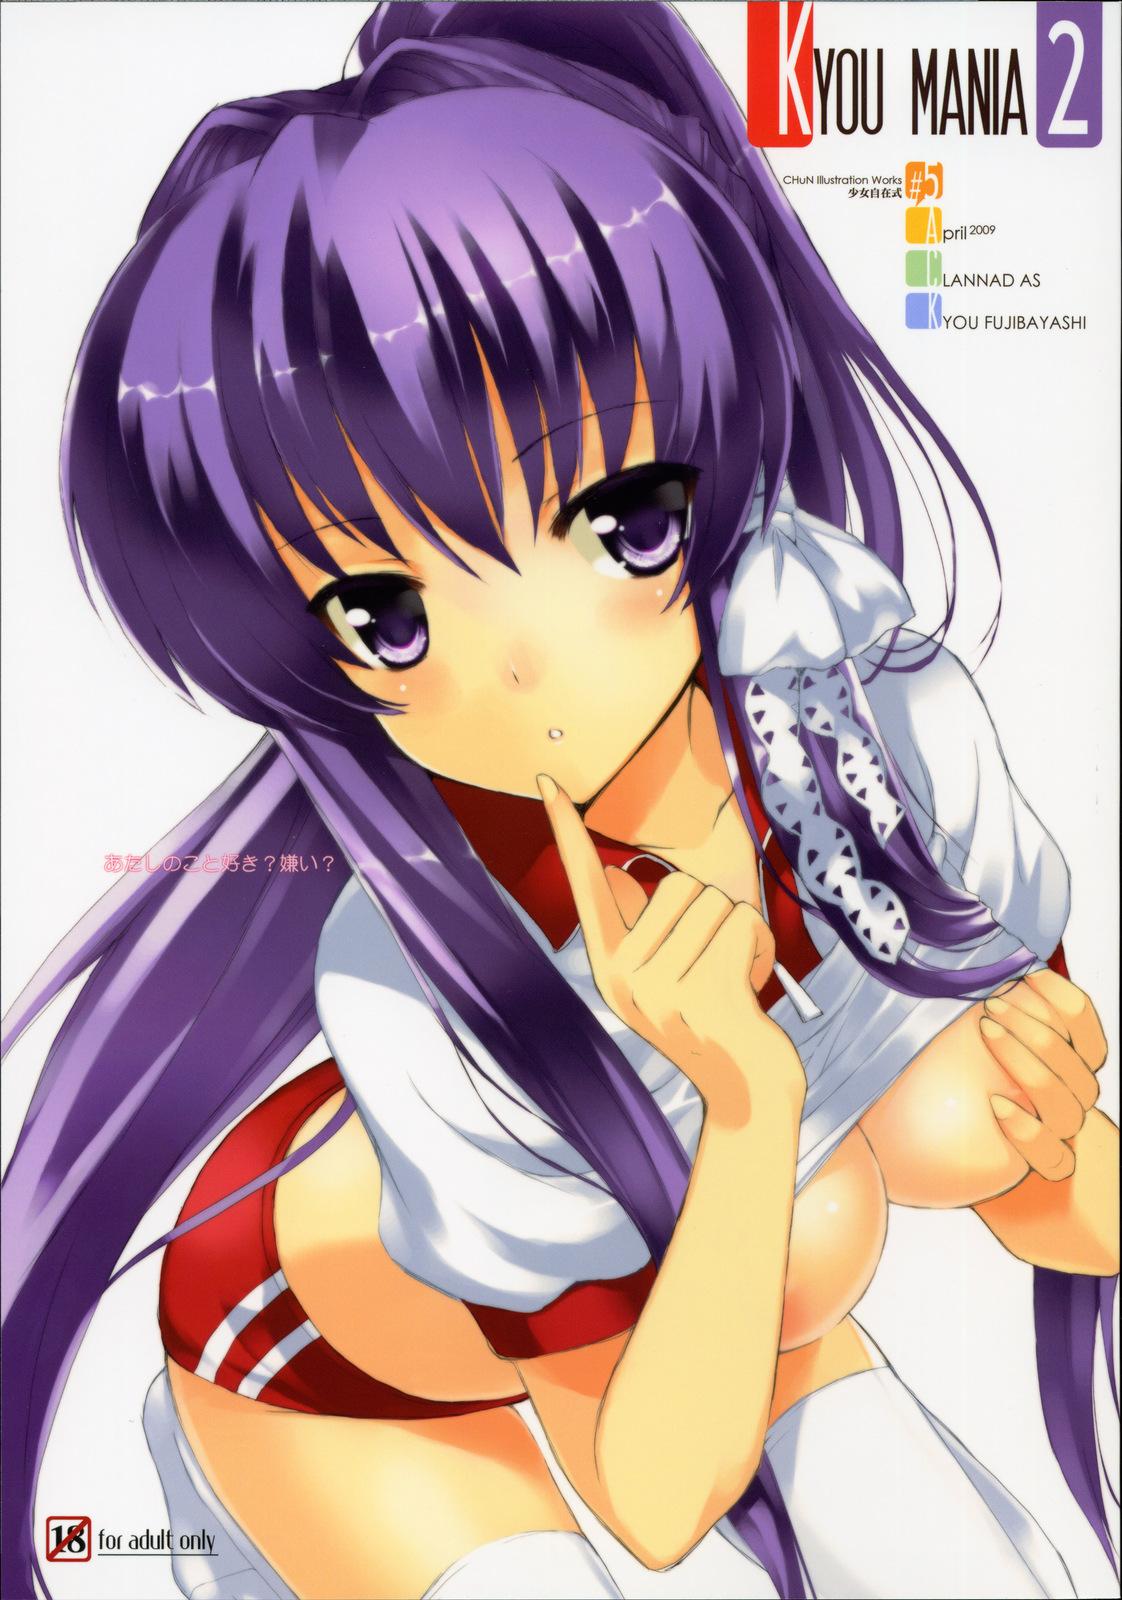 Culote KYOU MANIA 2 - Clannad Caught - Picture 1